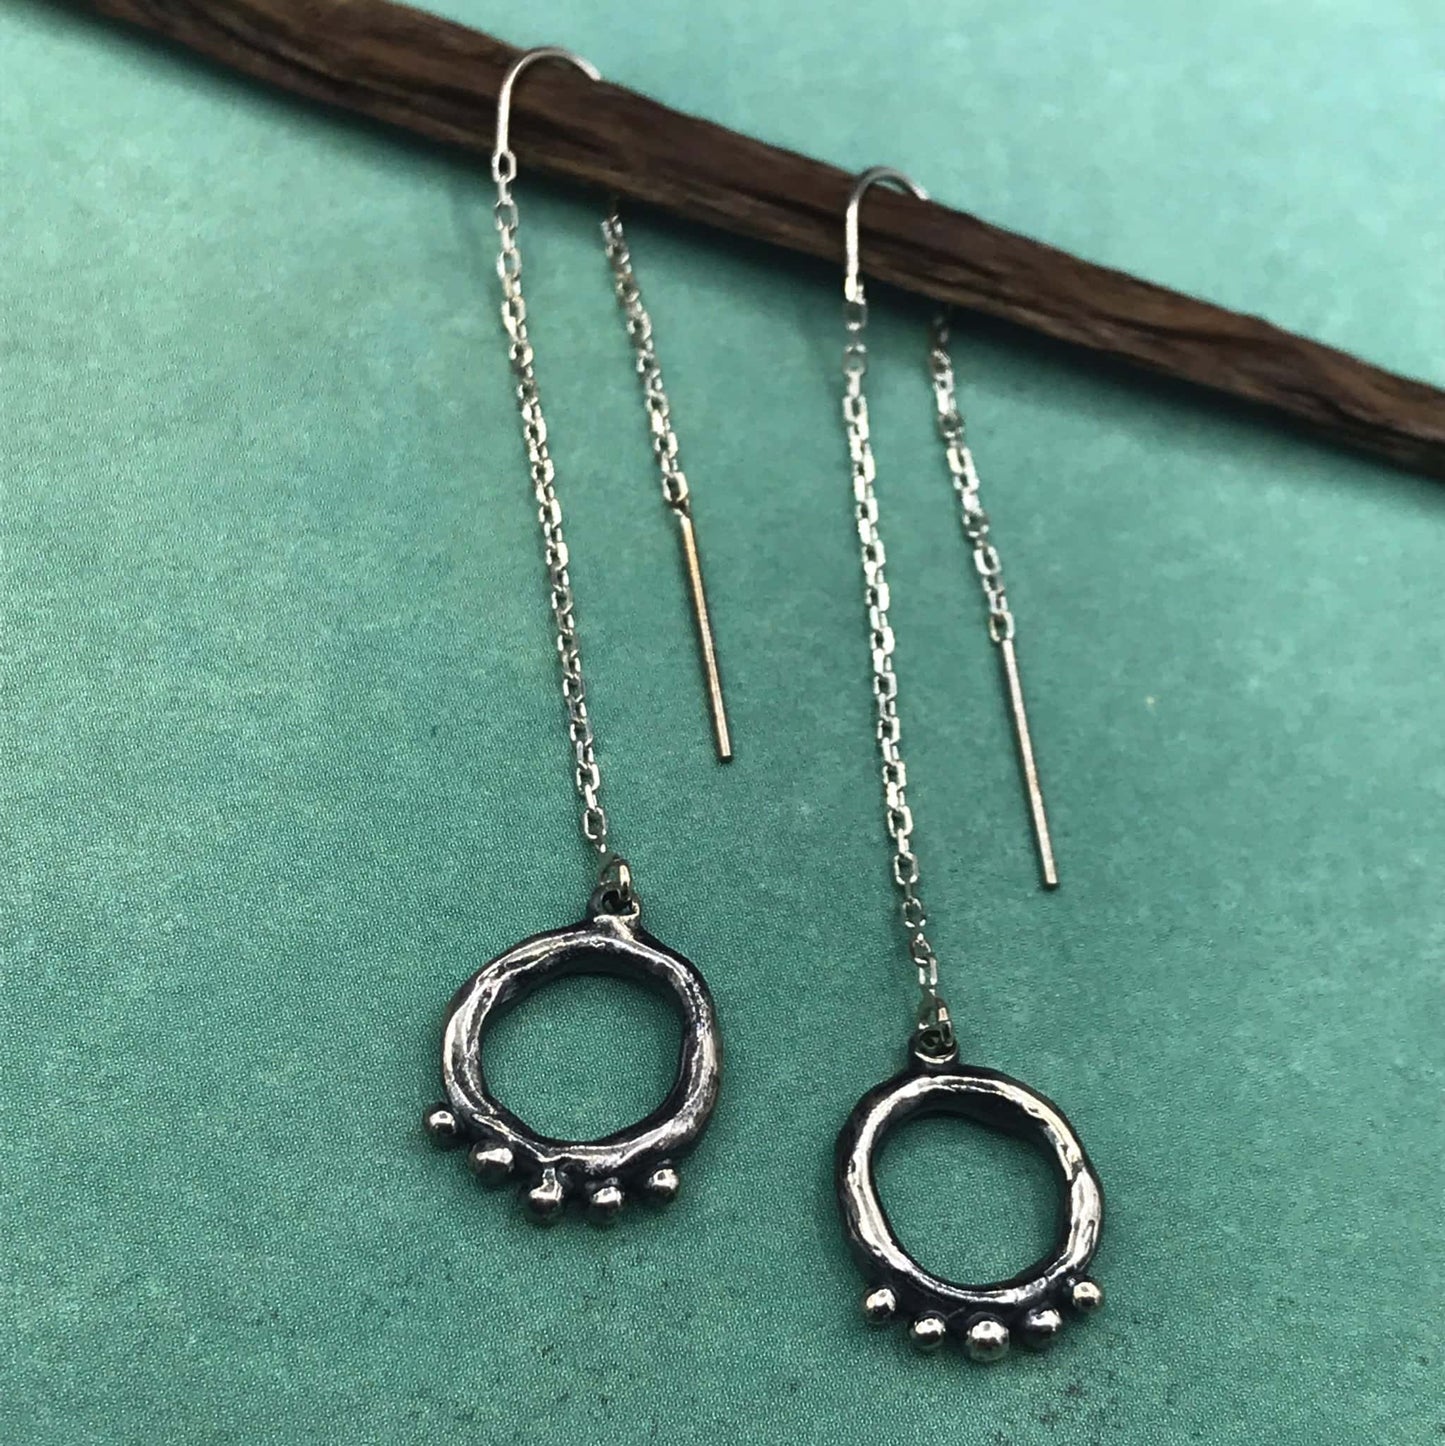 Organic Open Circle Earrings with 5 Meditation dots on Threaders